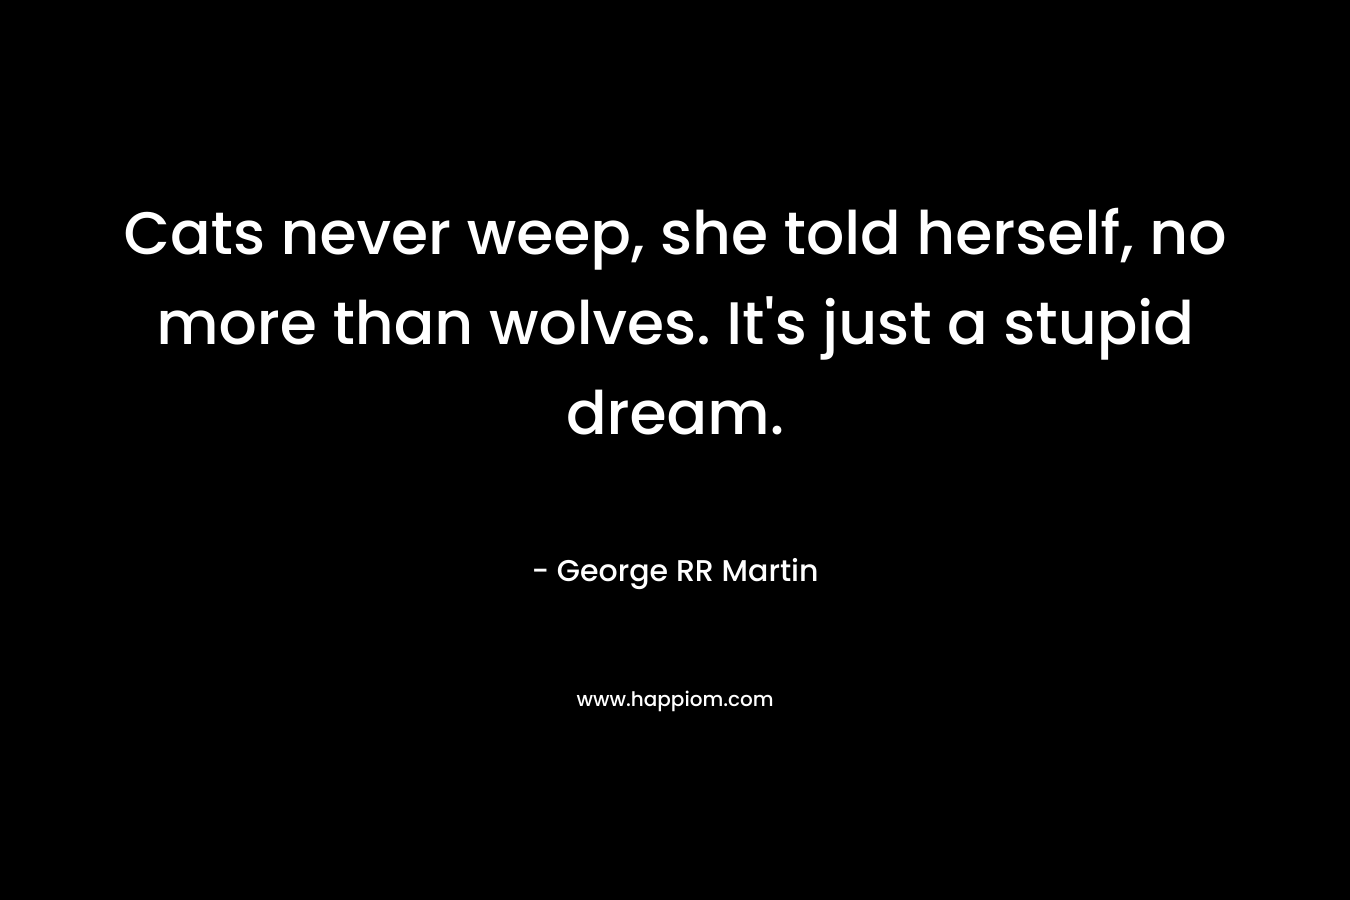 Cats never weep, she told herself, no more than wolves. It’s just a stupid dream. – George RR Martin